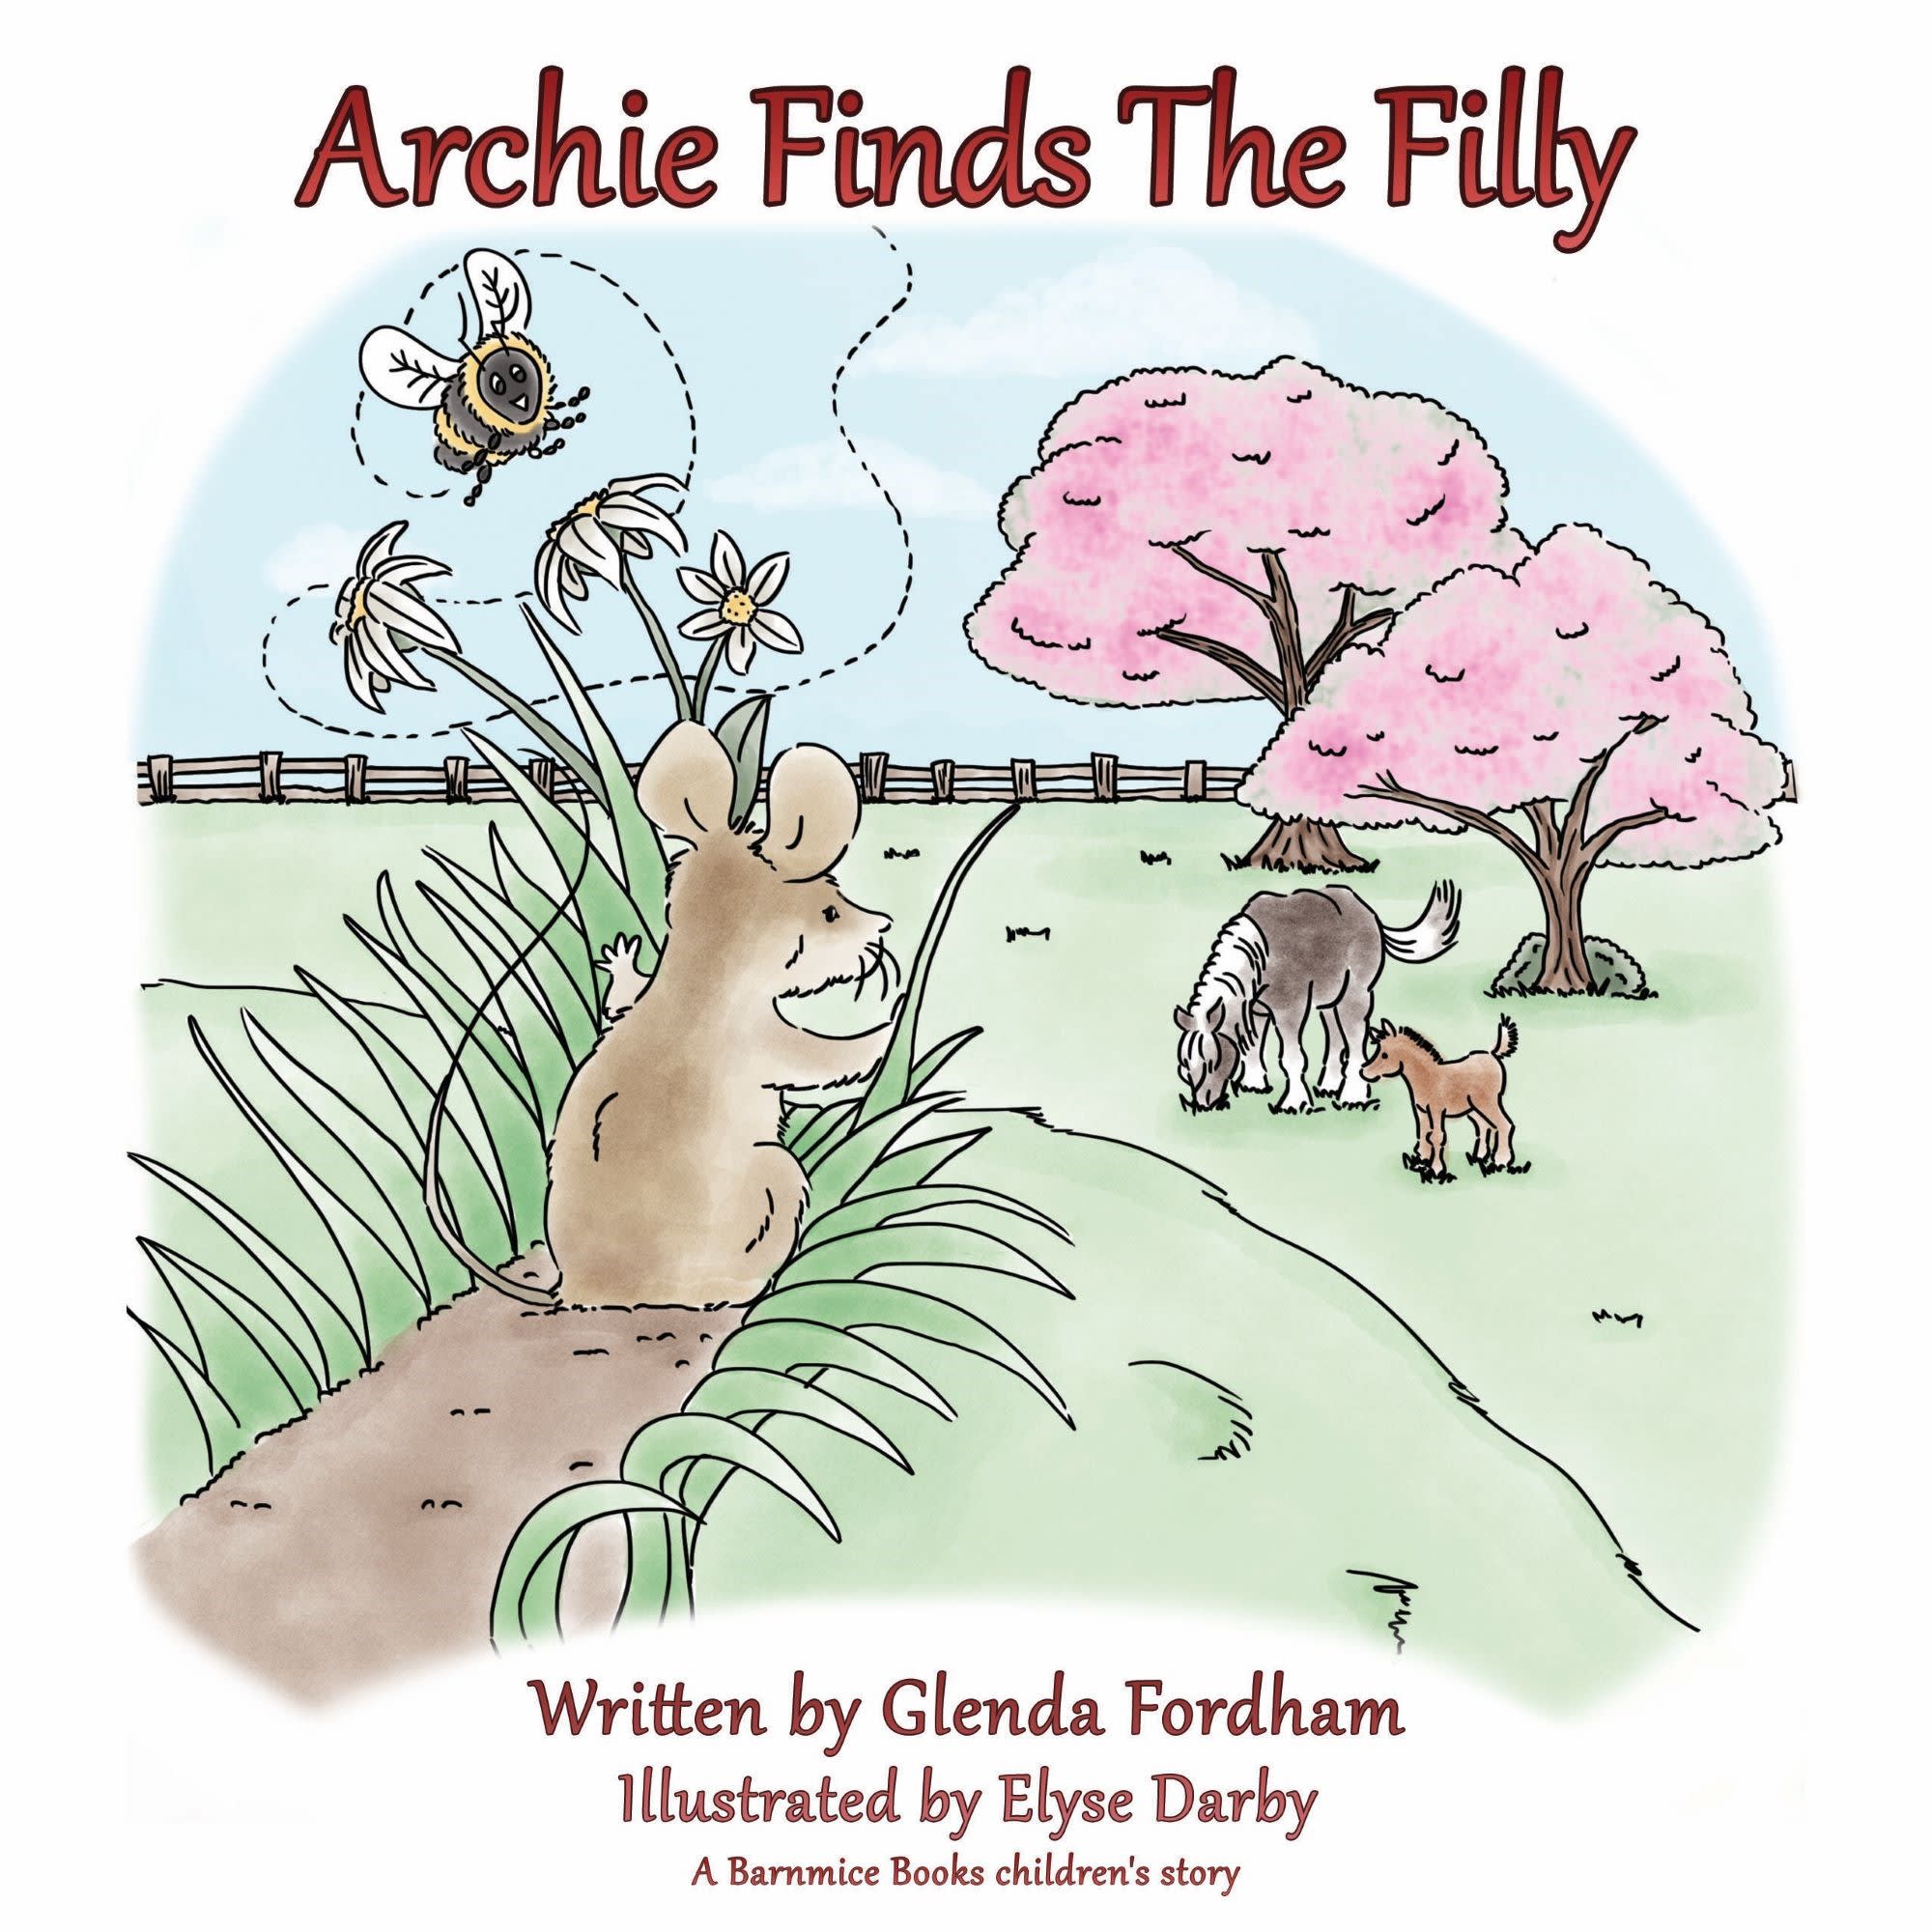 Archie Finds a New Home by Glenda Fordham